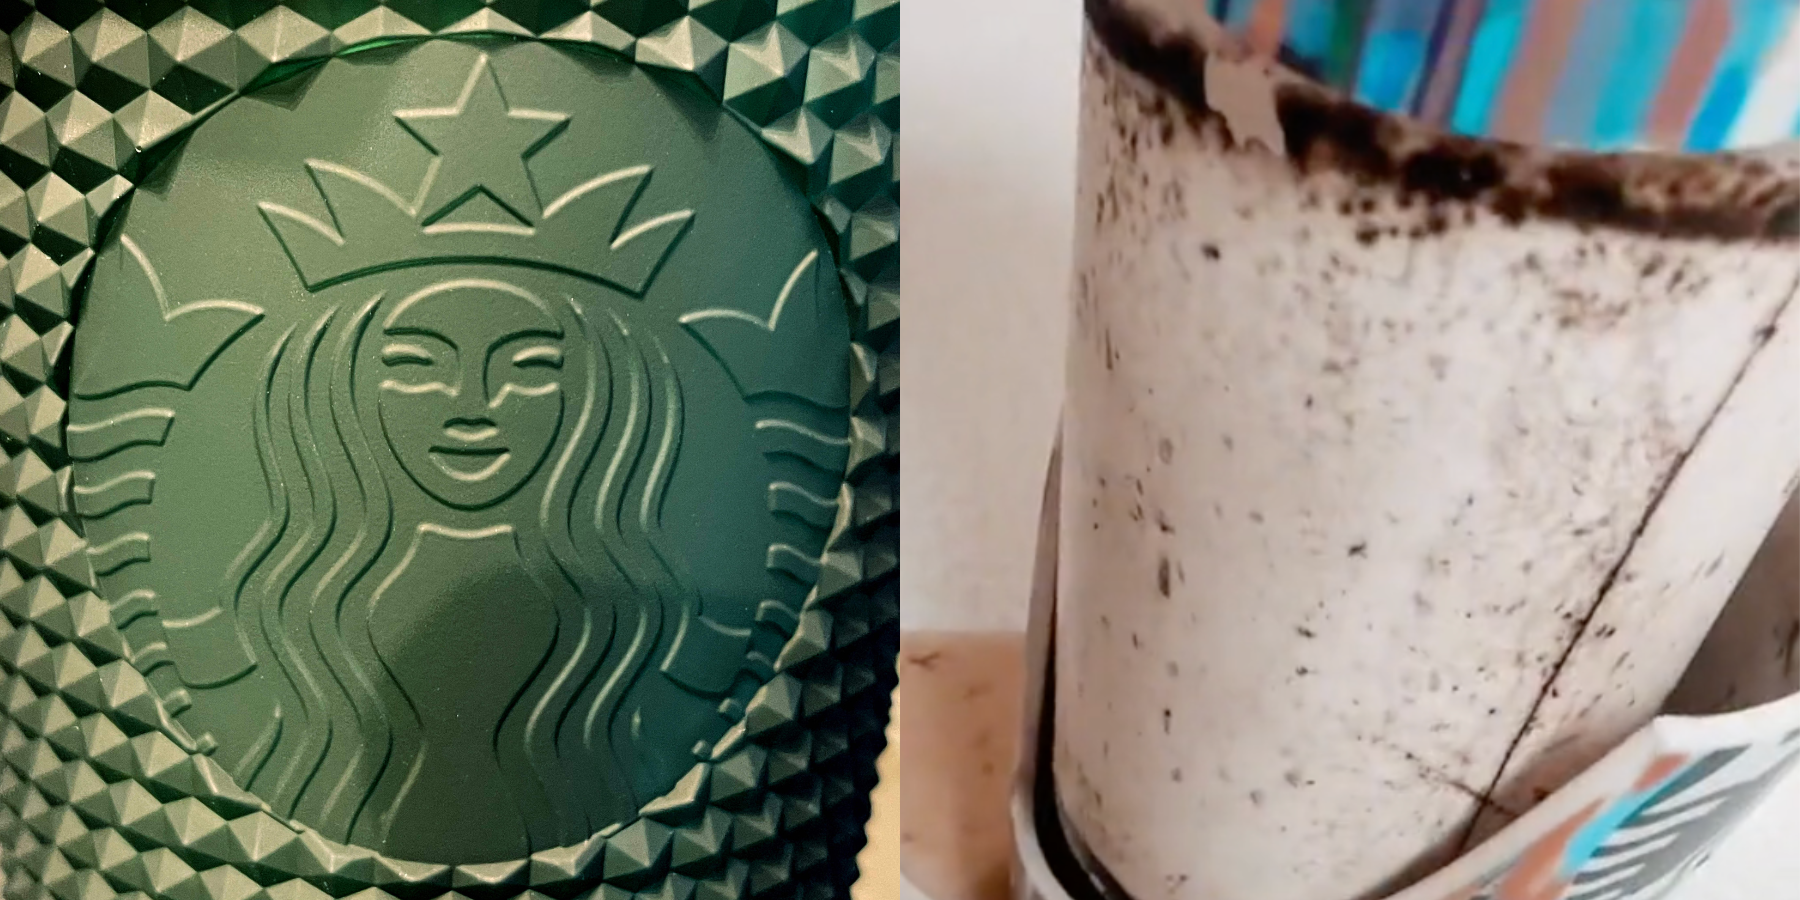 Your Yeti Cup's Lid Is Probably Full of Mold